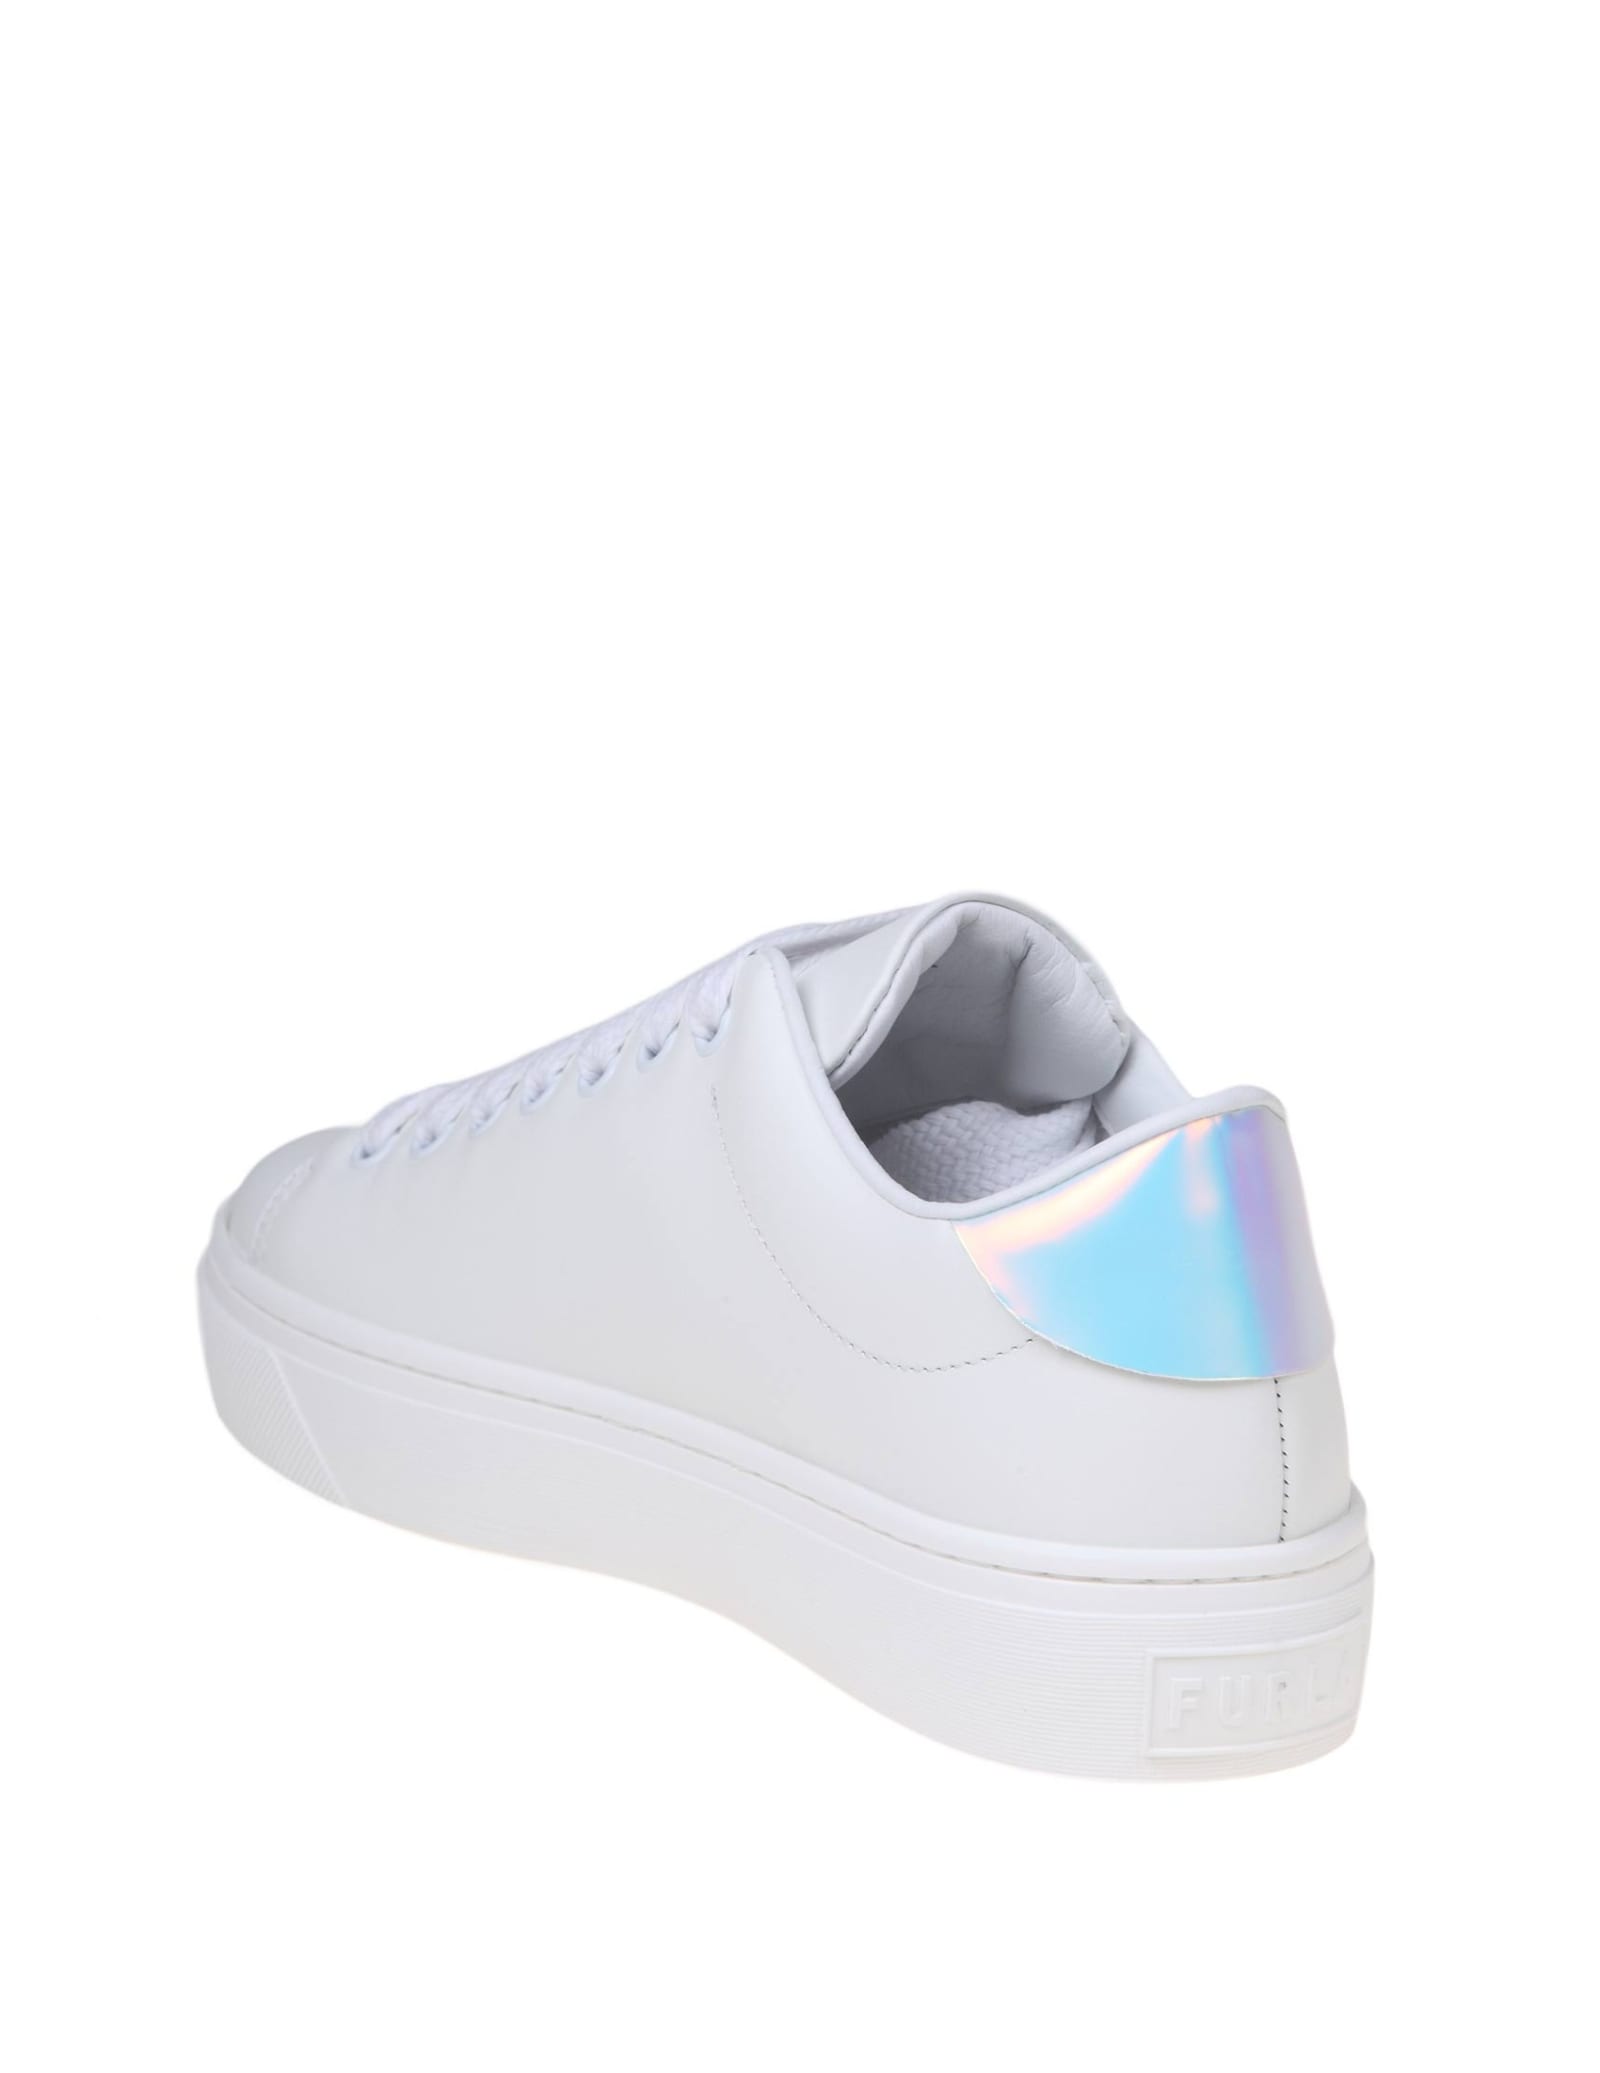 Shop Furla Joy Lace Up Sneakers In White Leather In Yellow Cream